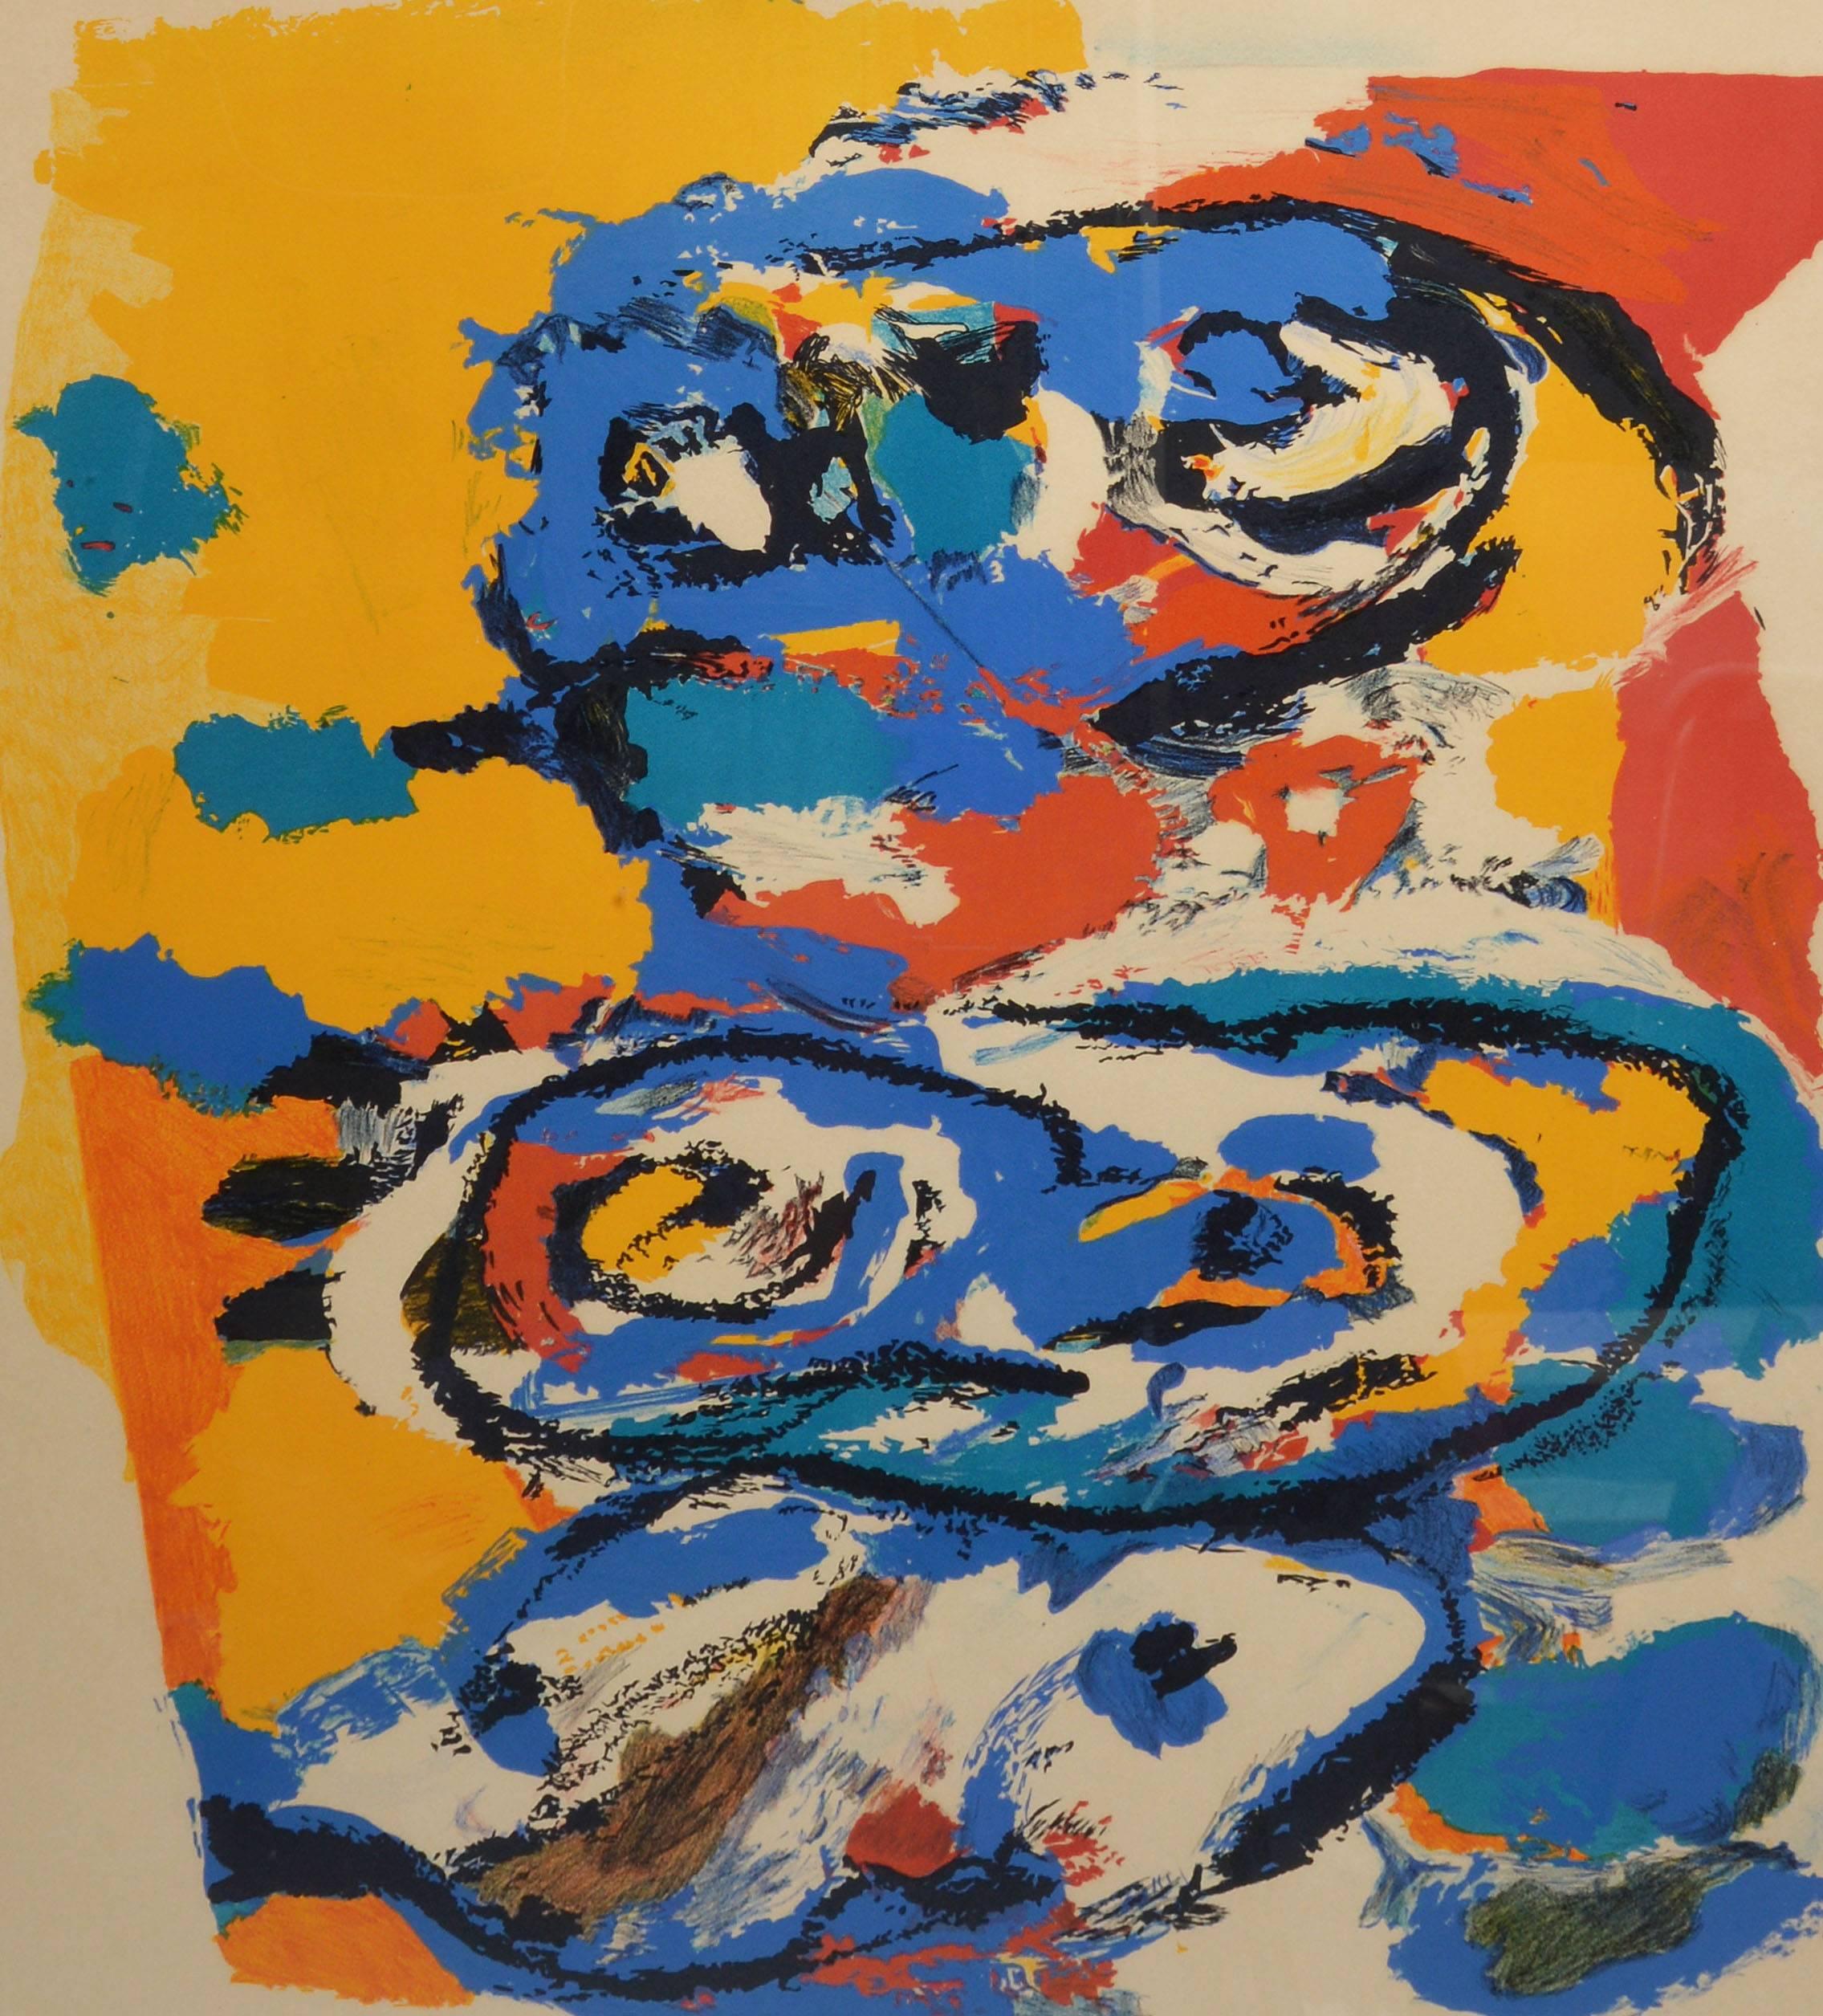 Abstract composition by Karel Appel.  Original lithograph on paper, circa 1965.  From a limited edition of 200 works.  Signed lower left, 